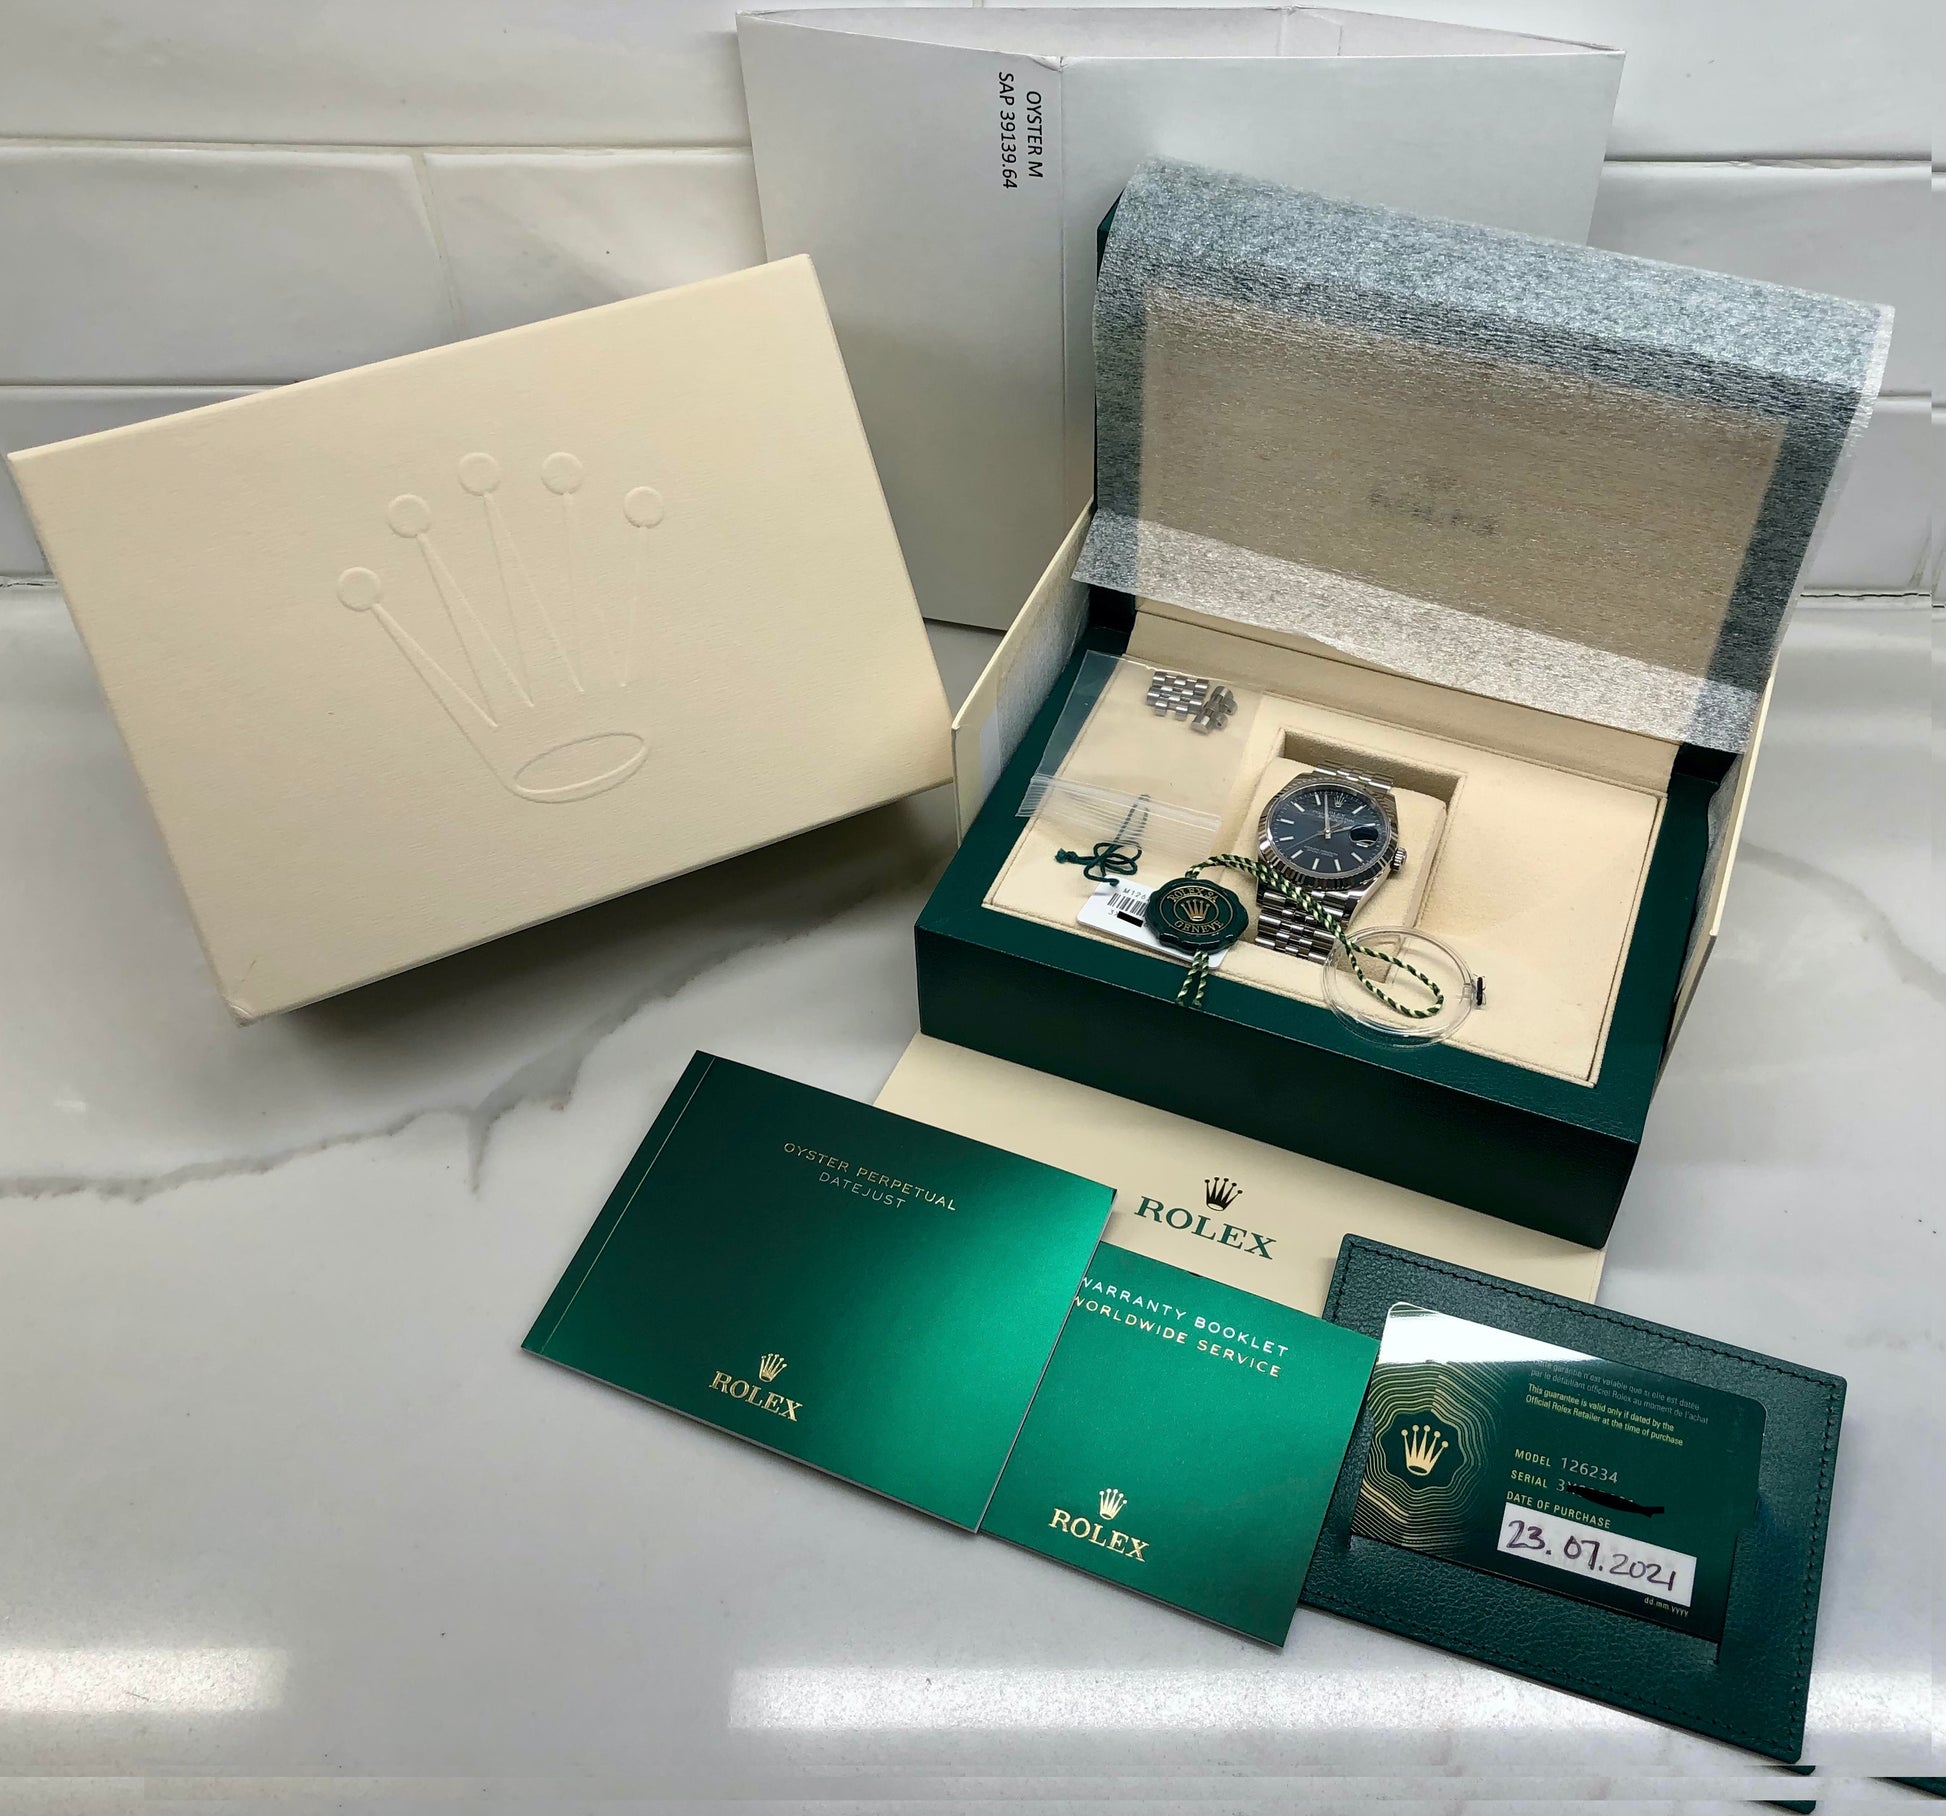 2021 Rolex Datejust 126234 Blue Jubilee 36mm Fluted Bezel Wristwatch with Box and Papers - Hashtag Watch Company